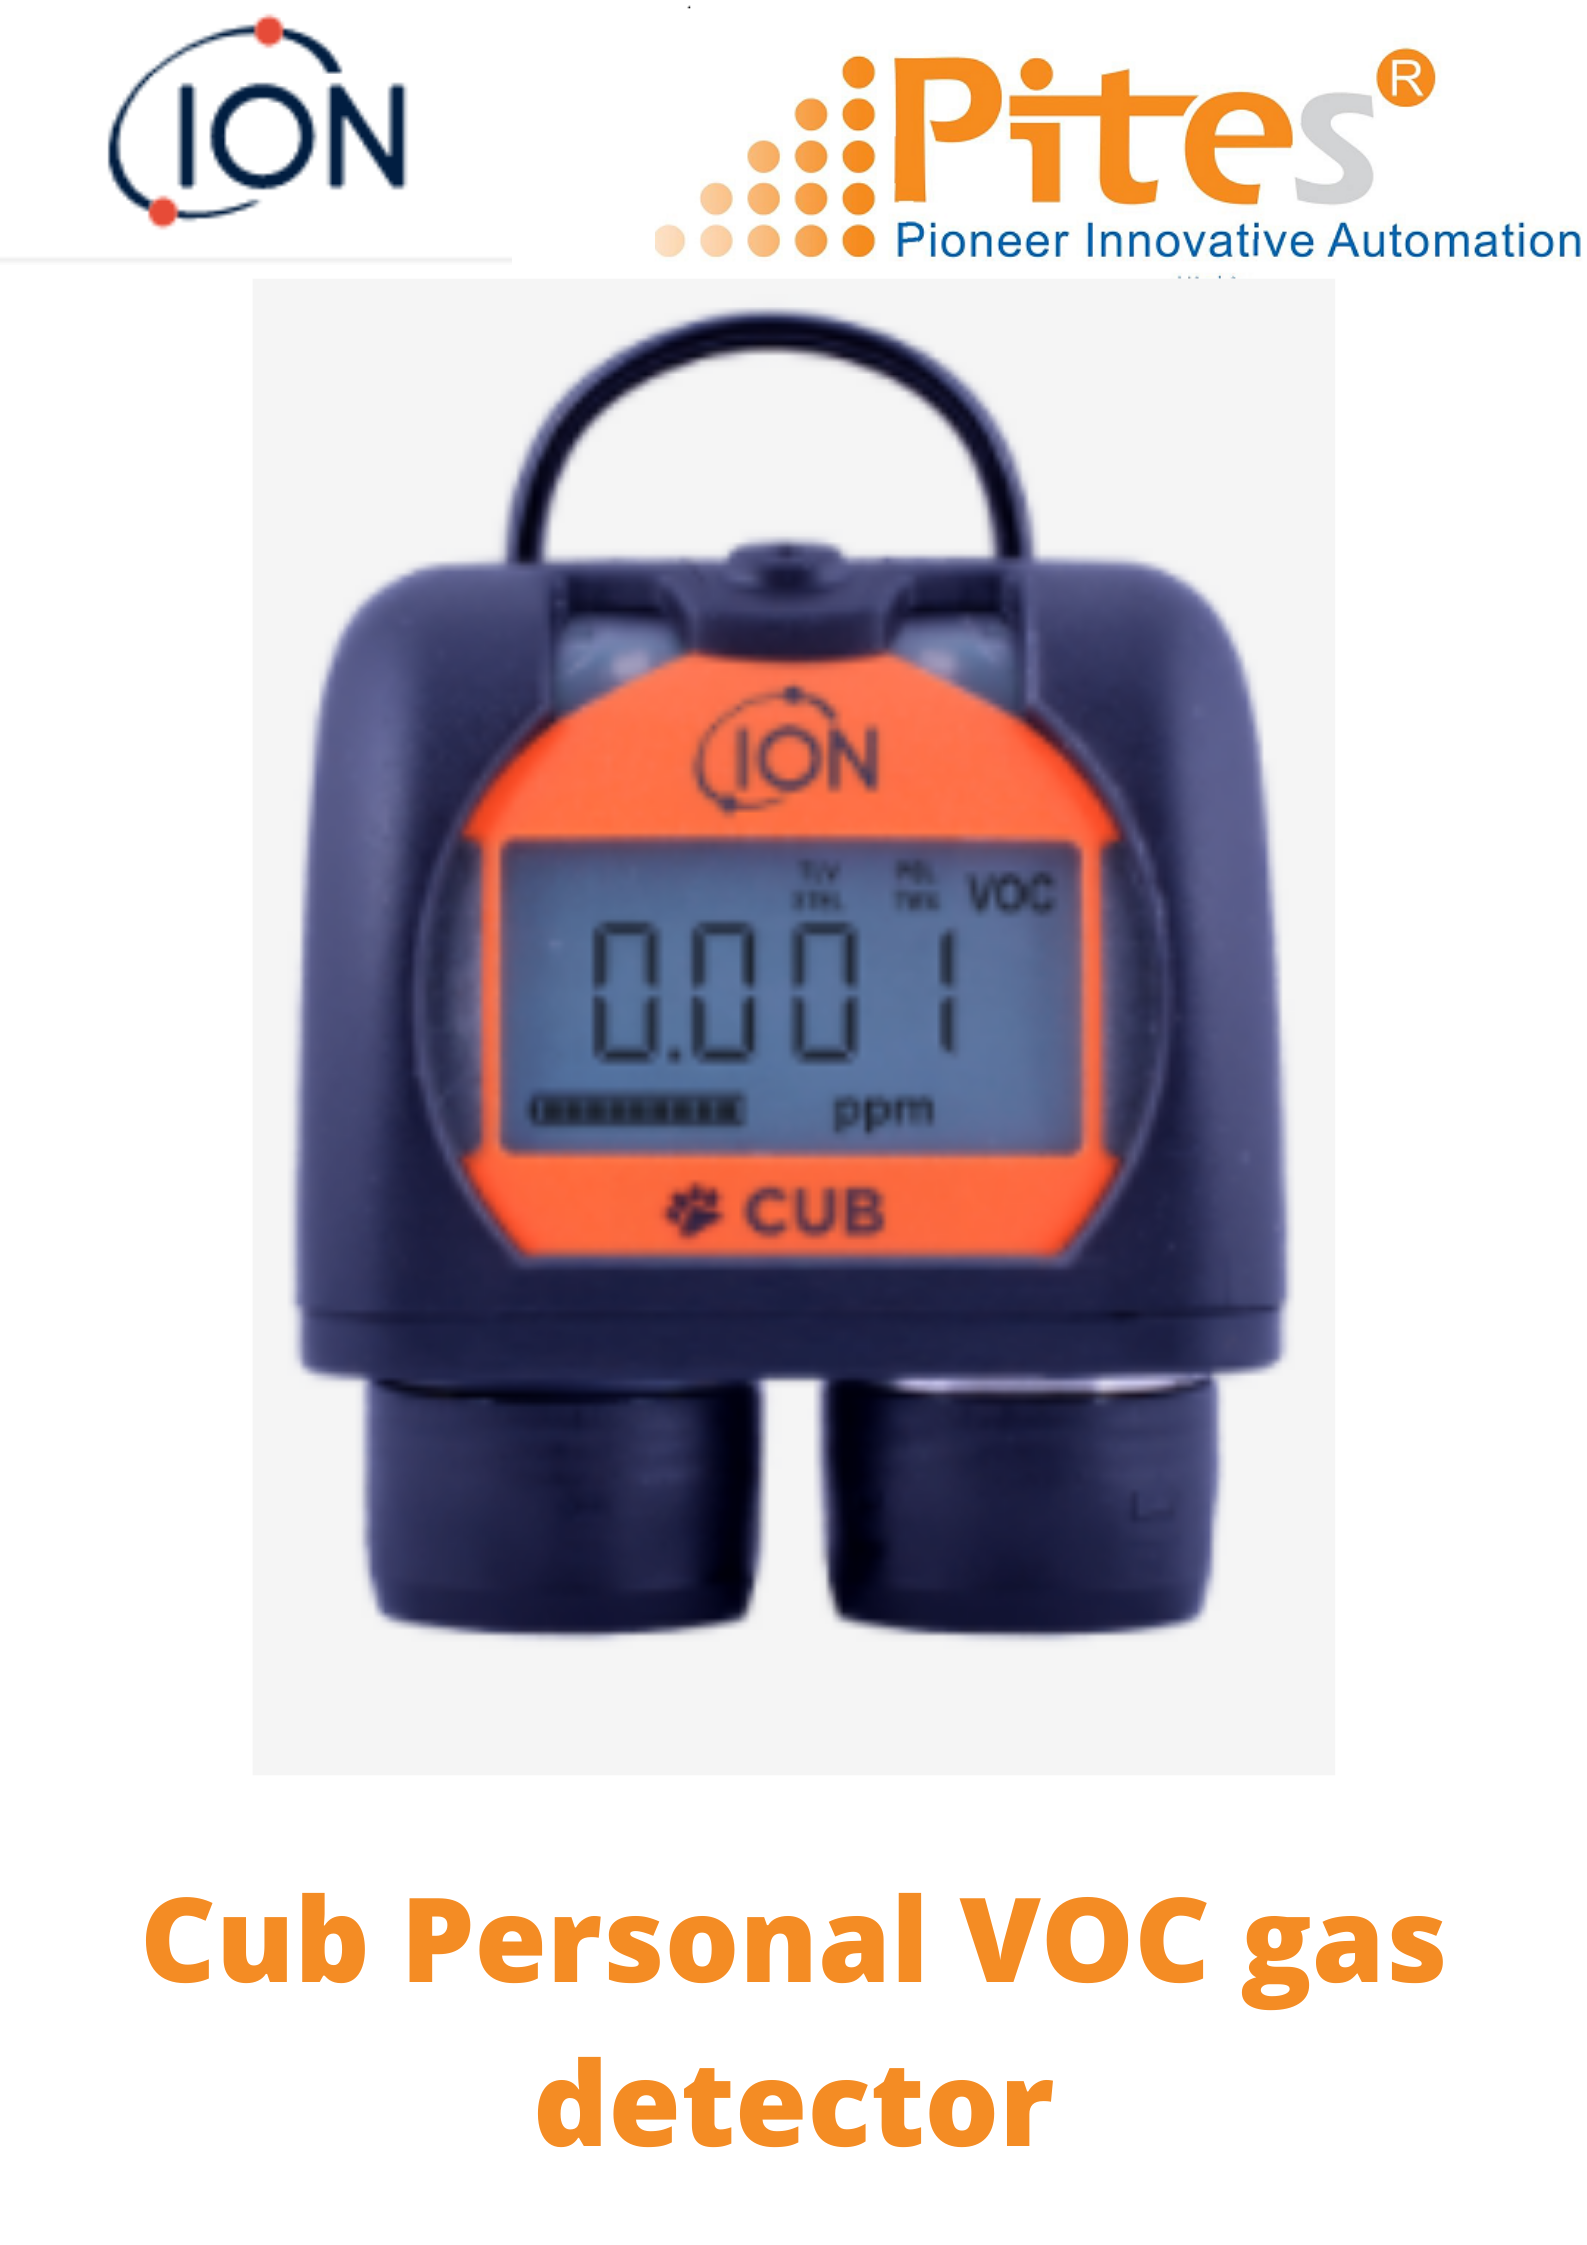 dai-ly-ion-science-vietnam-ion-science-viet-nam-personal-voc-gas-detector-cub.png